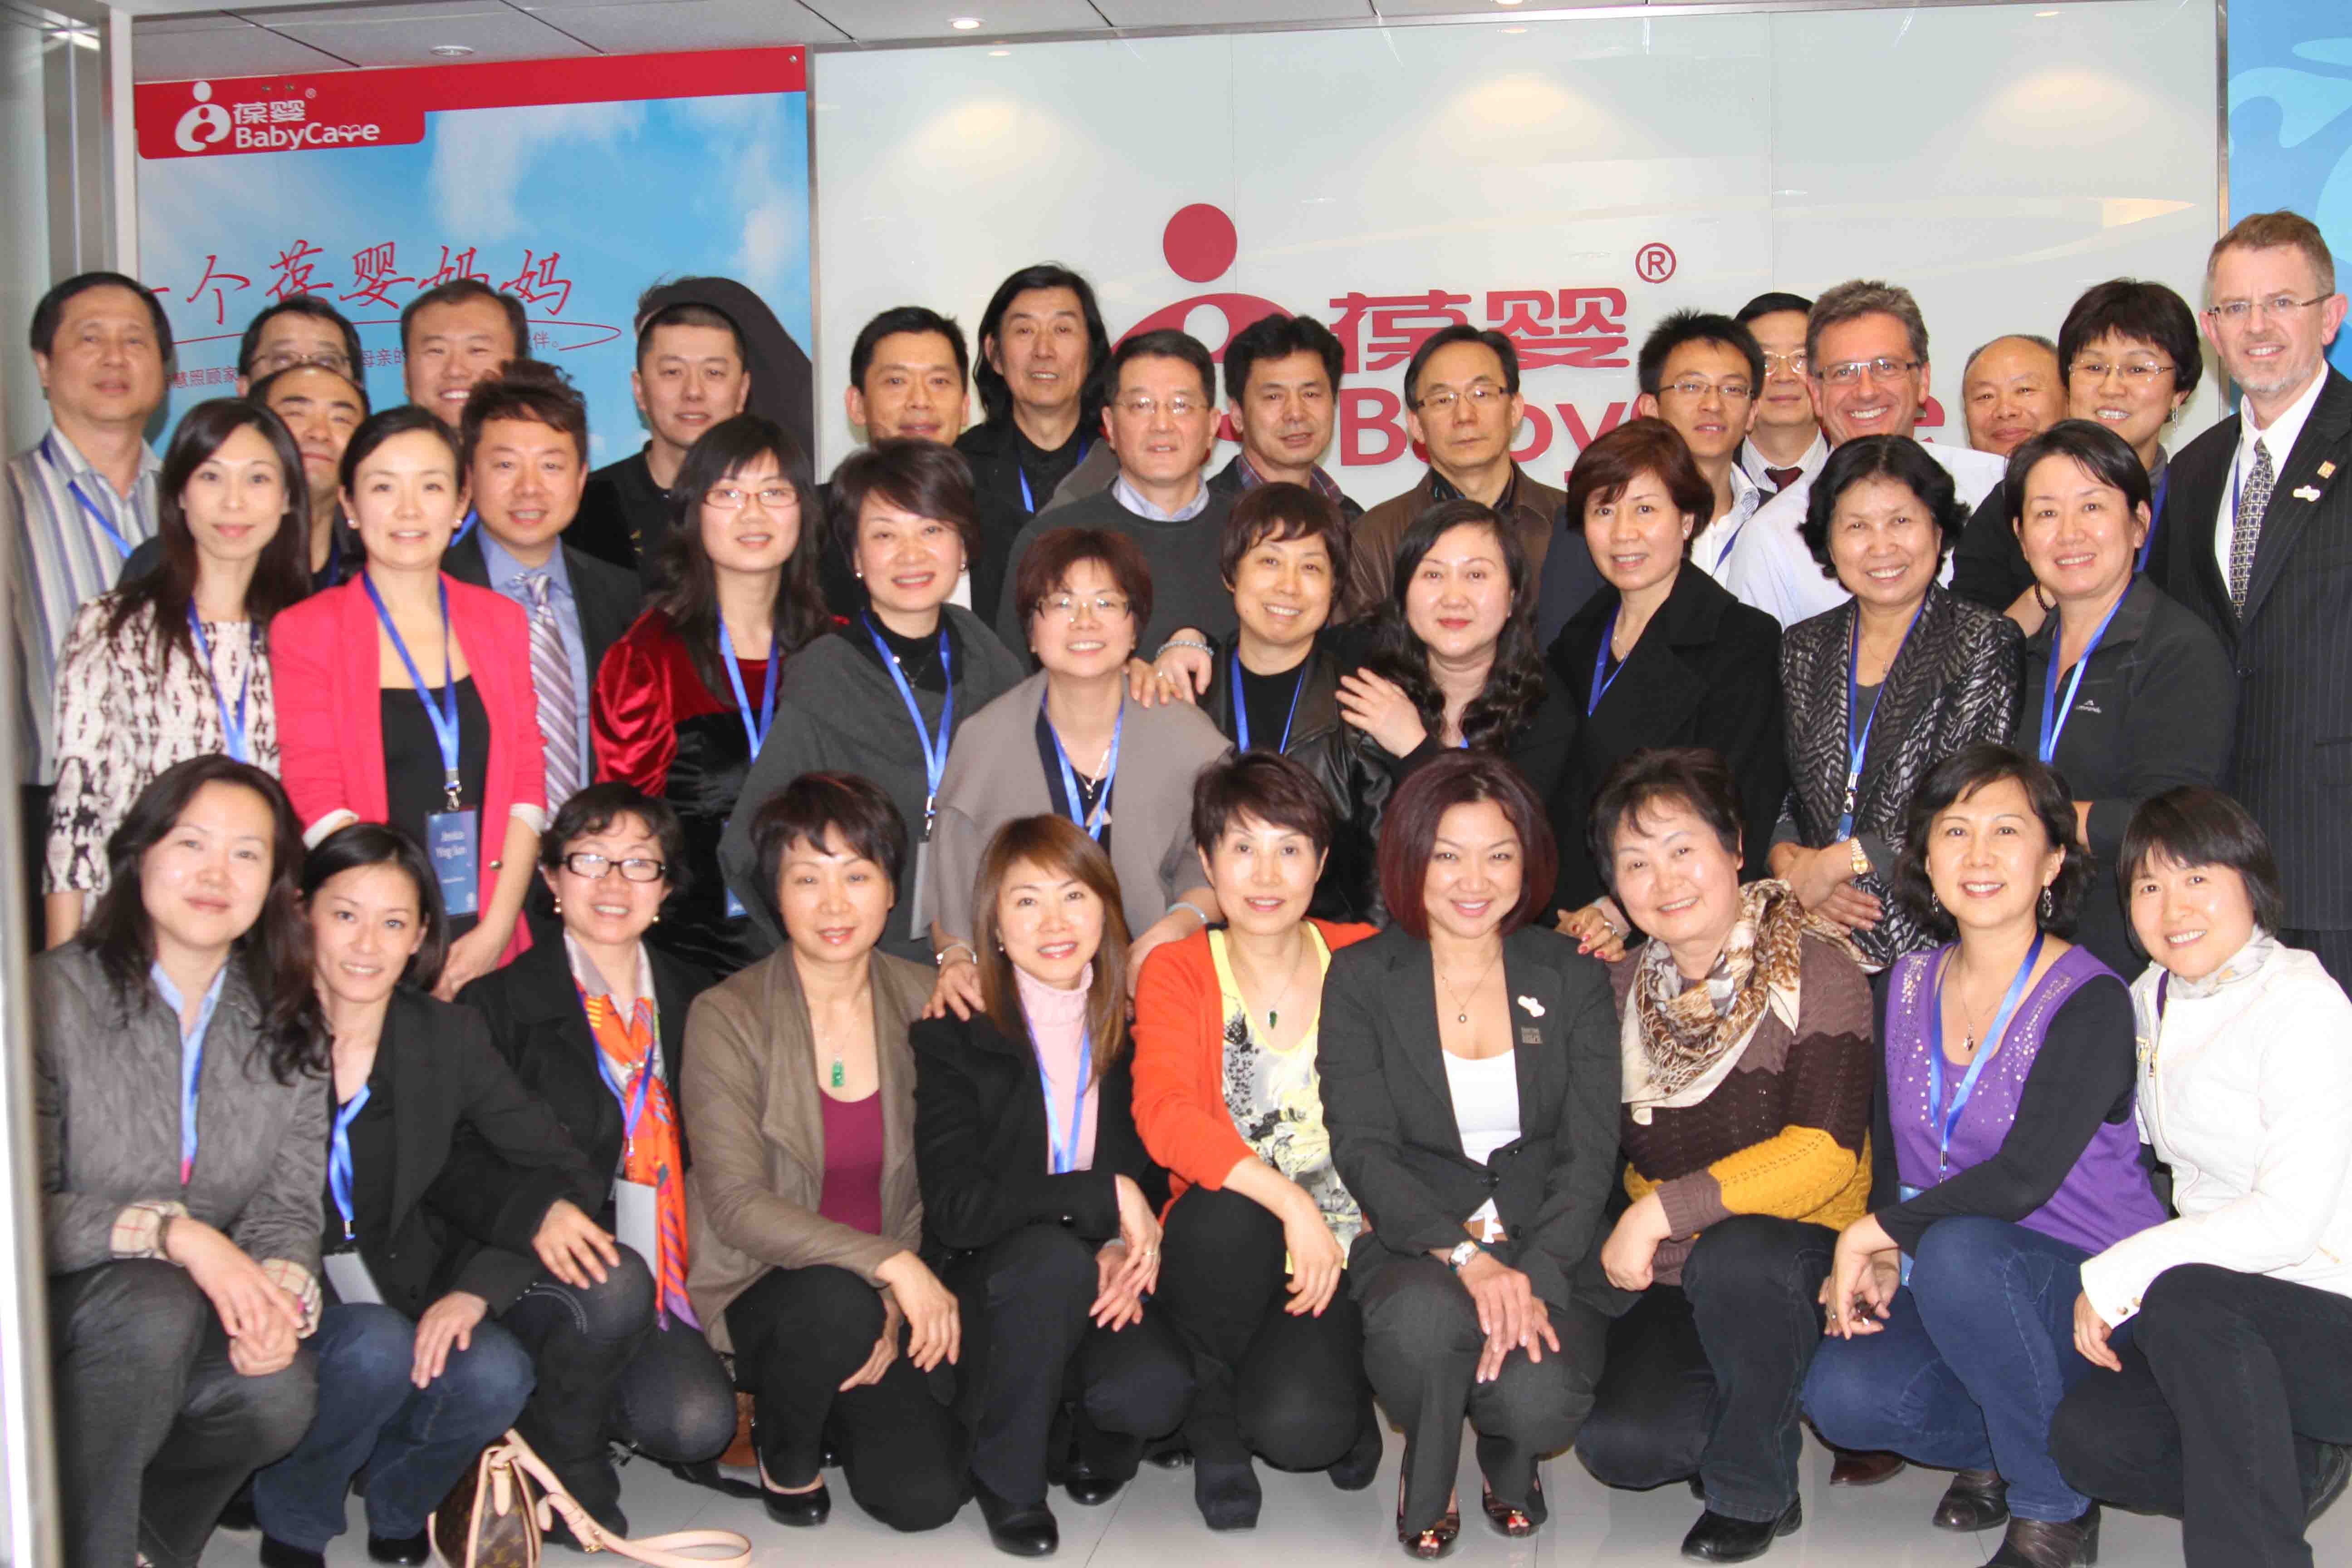 45 USANA Chinese leaders from Australia, Canada, New Zealand and the United States flew into Beijing for a two-day tour of BabyCare’s branch offices and manufacturing facilities.